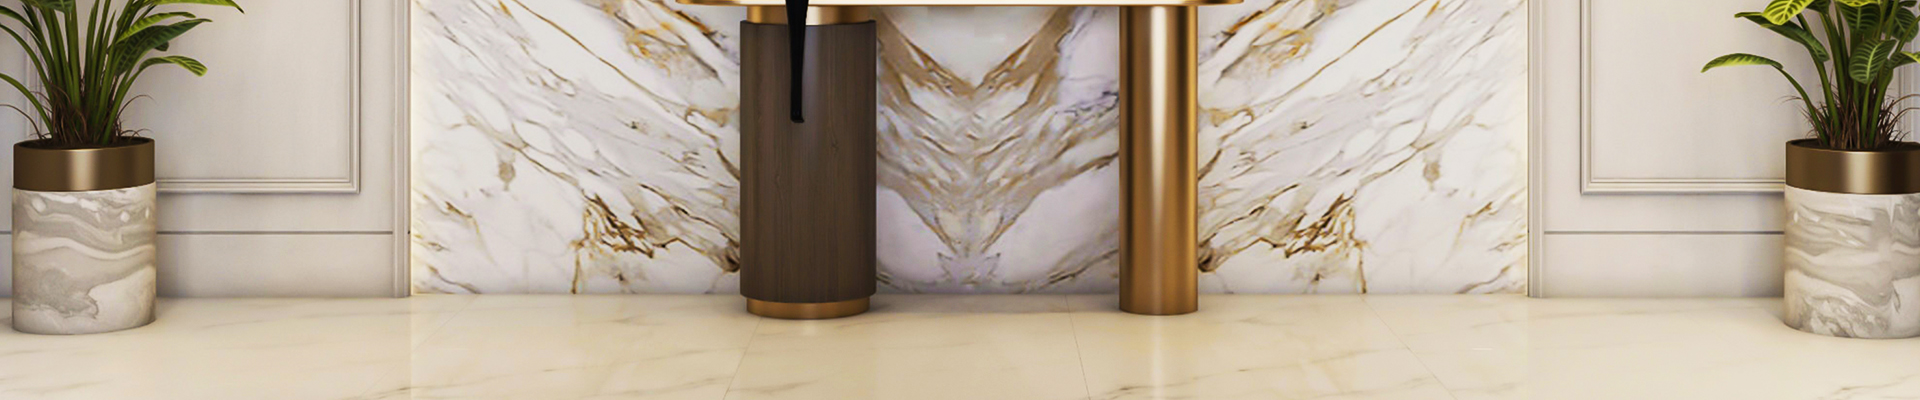 Best Marble Design flooring & Wall for your Spaces